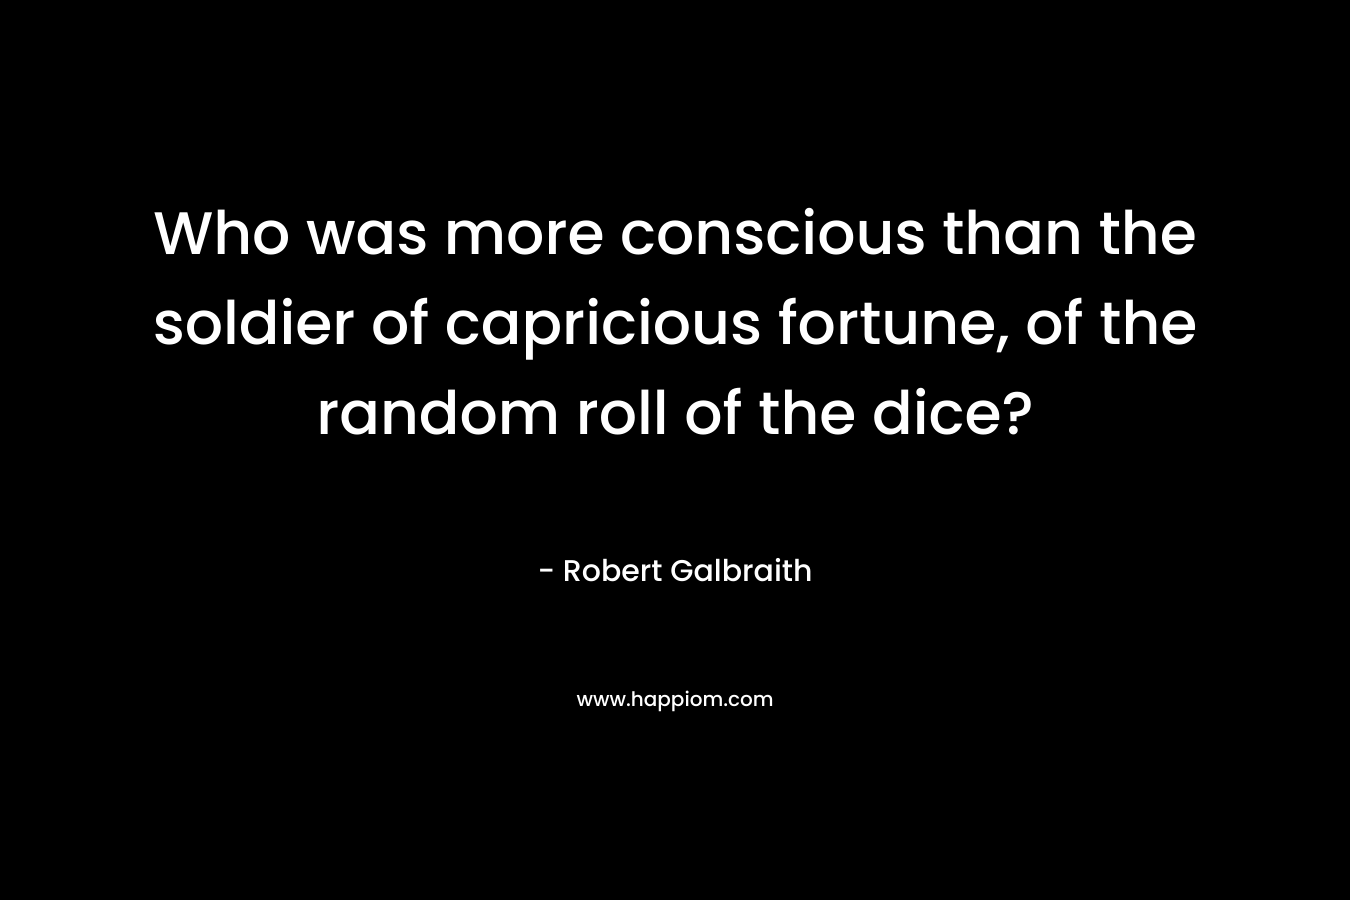 Who was more conscious than the soldier of capricious fortune, of the random roll of the dice? – Robert Galbraith